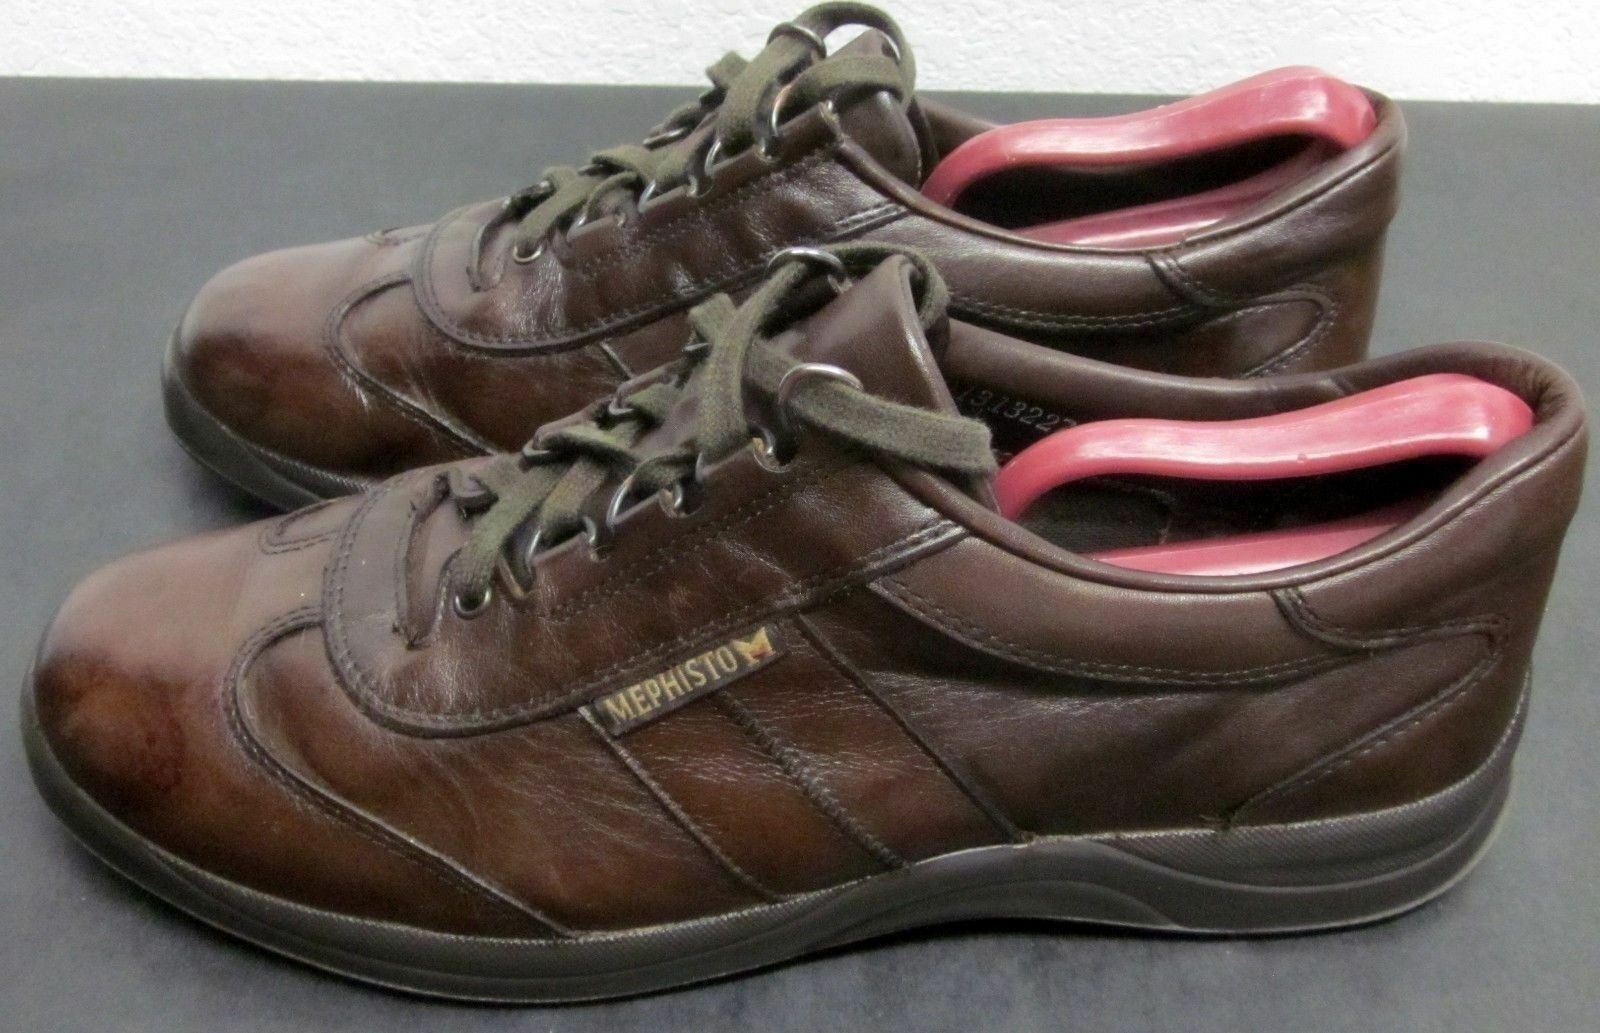 MEPHISTO RUNOFF AIR-JET SYSTEM MEN'S (8) BROWN LEATHER SNEAKERS SHOCK ...